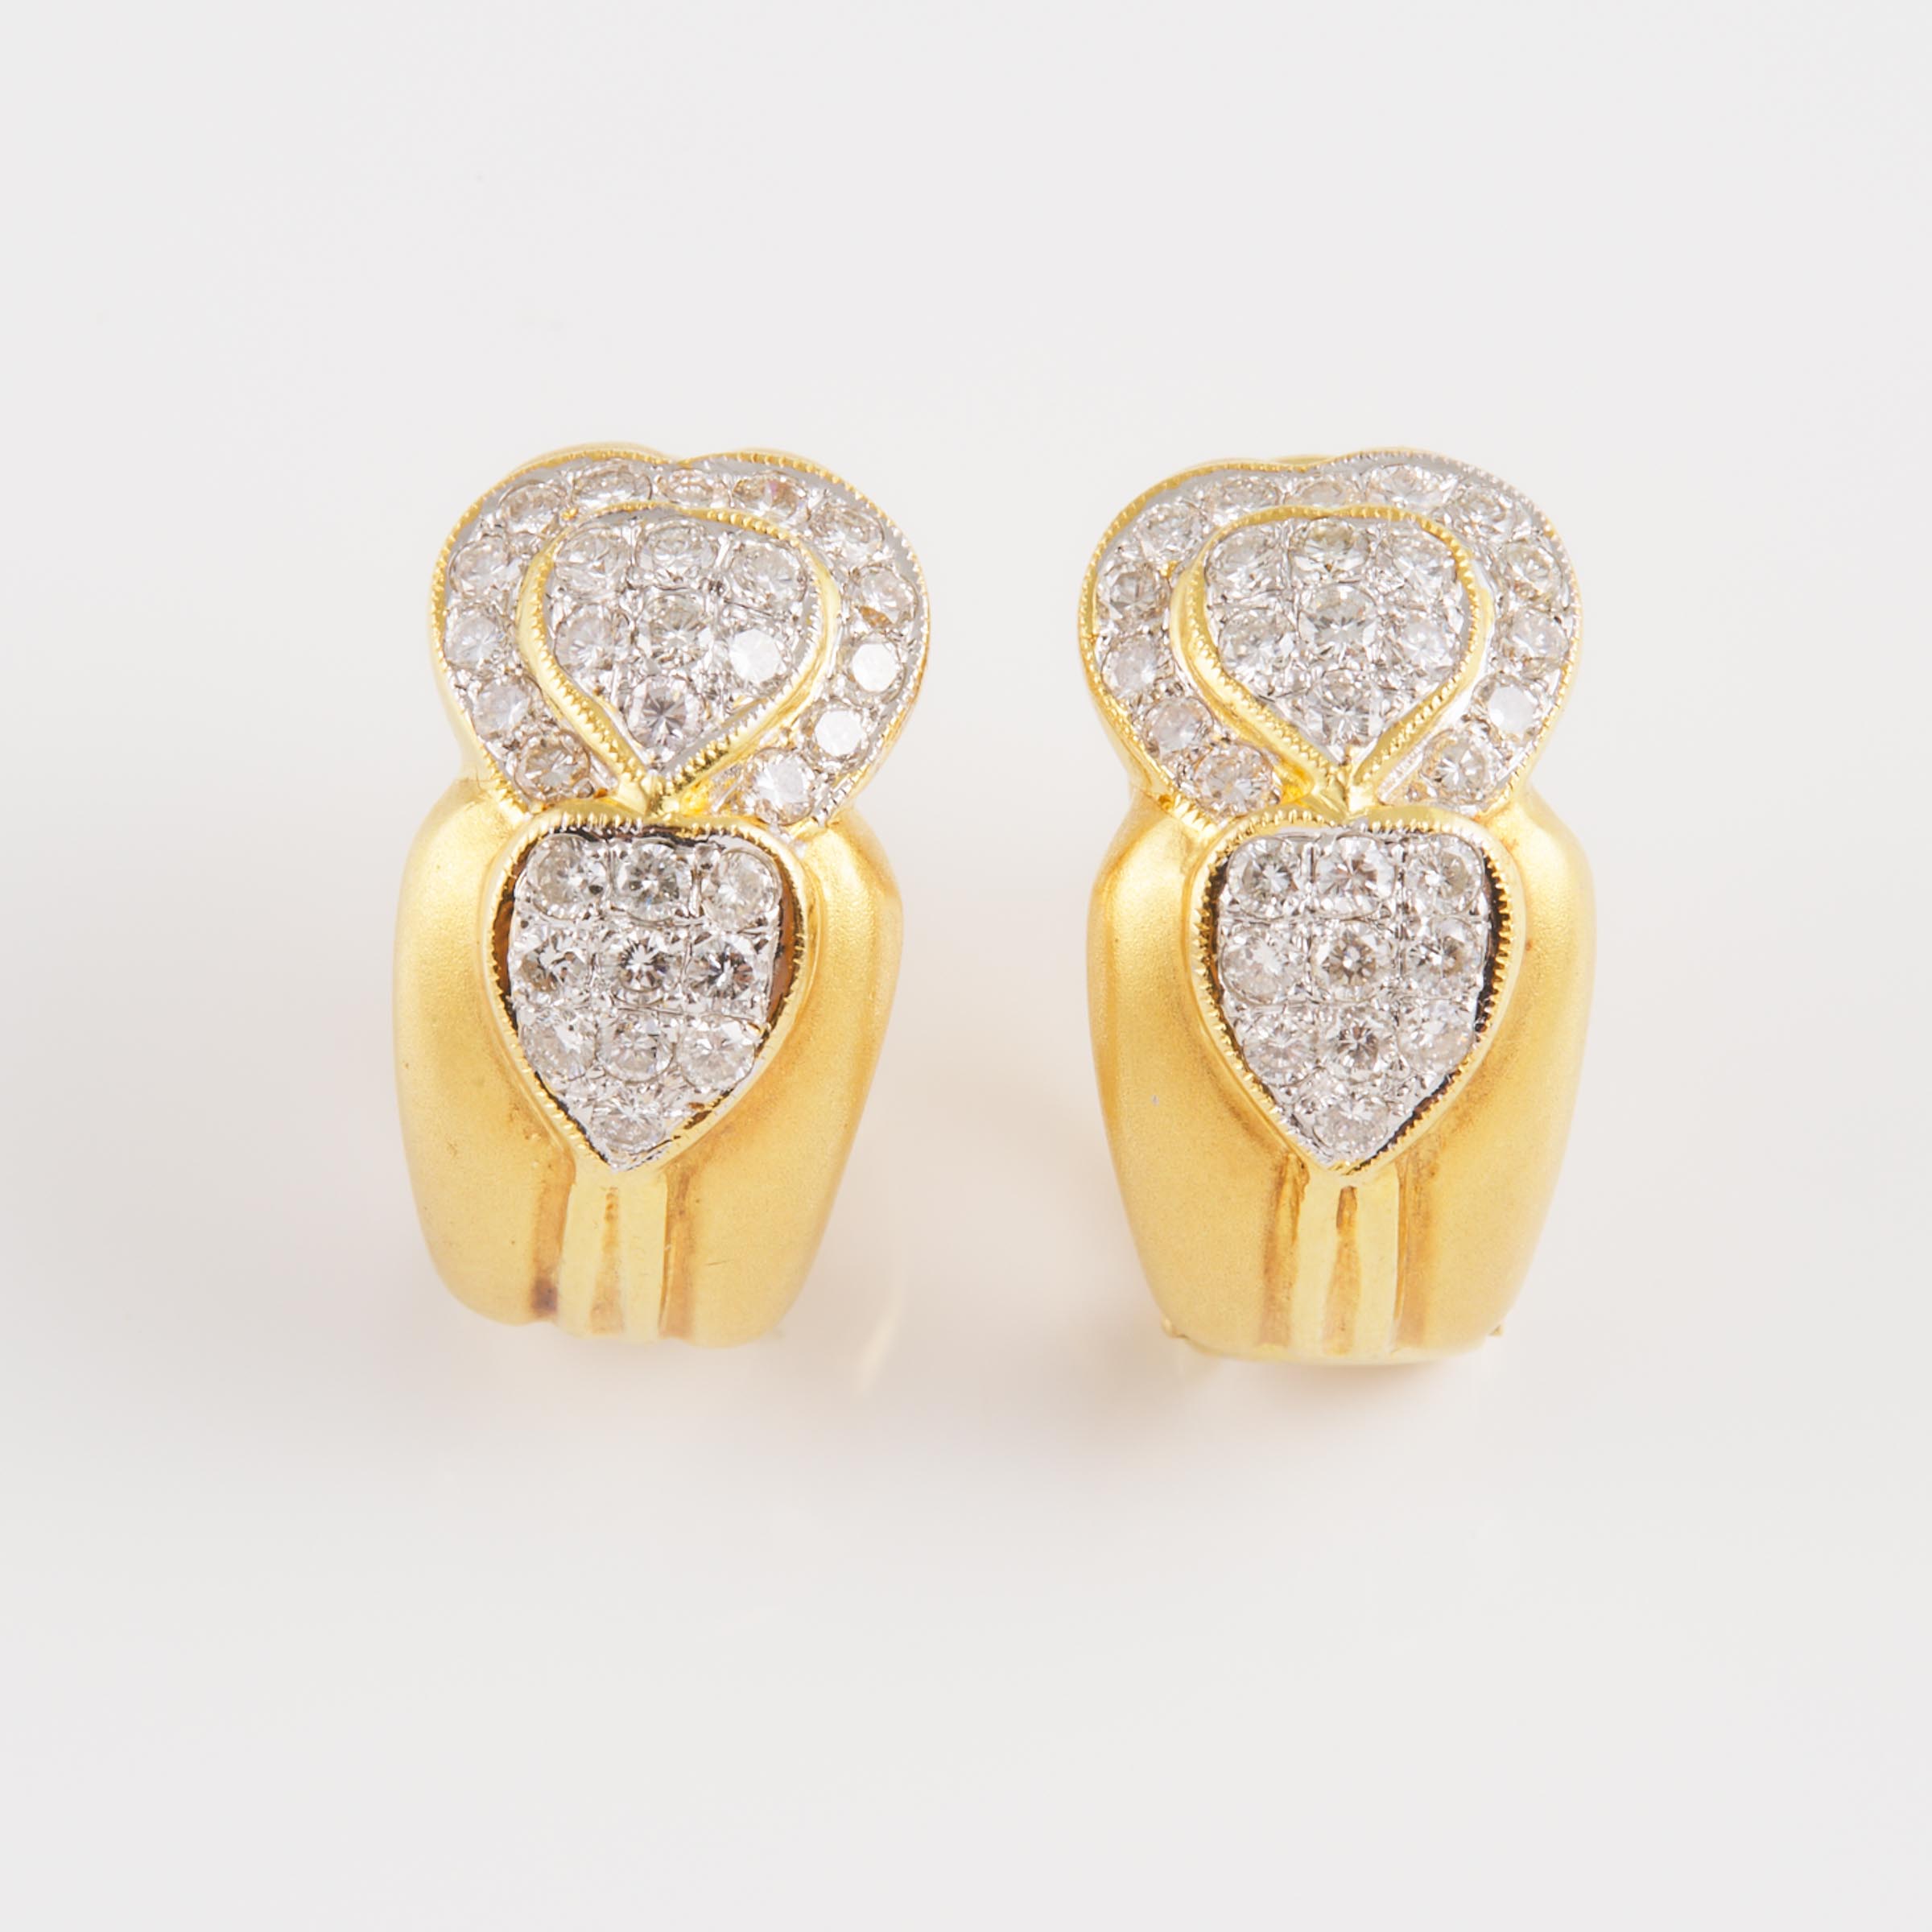 Pair Of 18k Yellow And White Gold Earrings